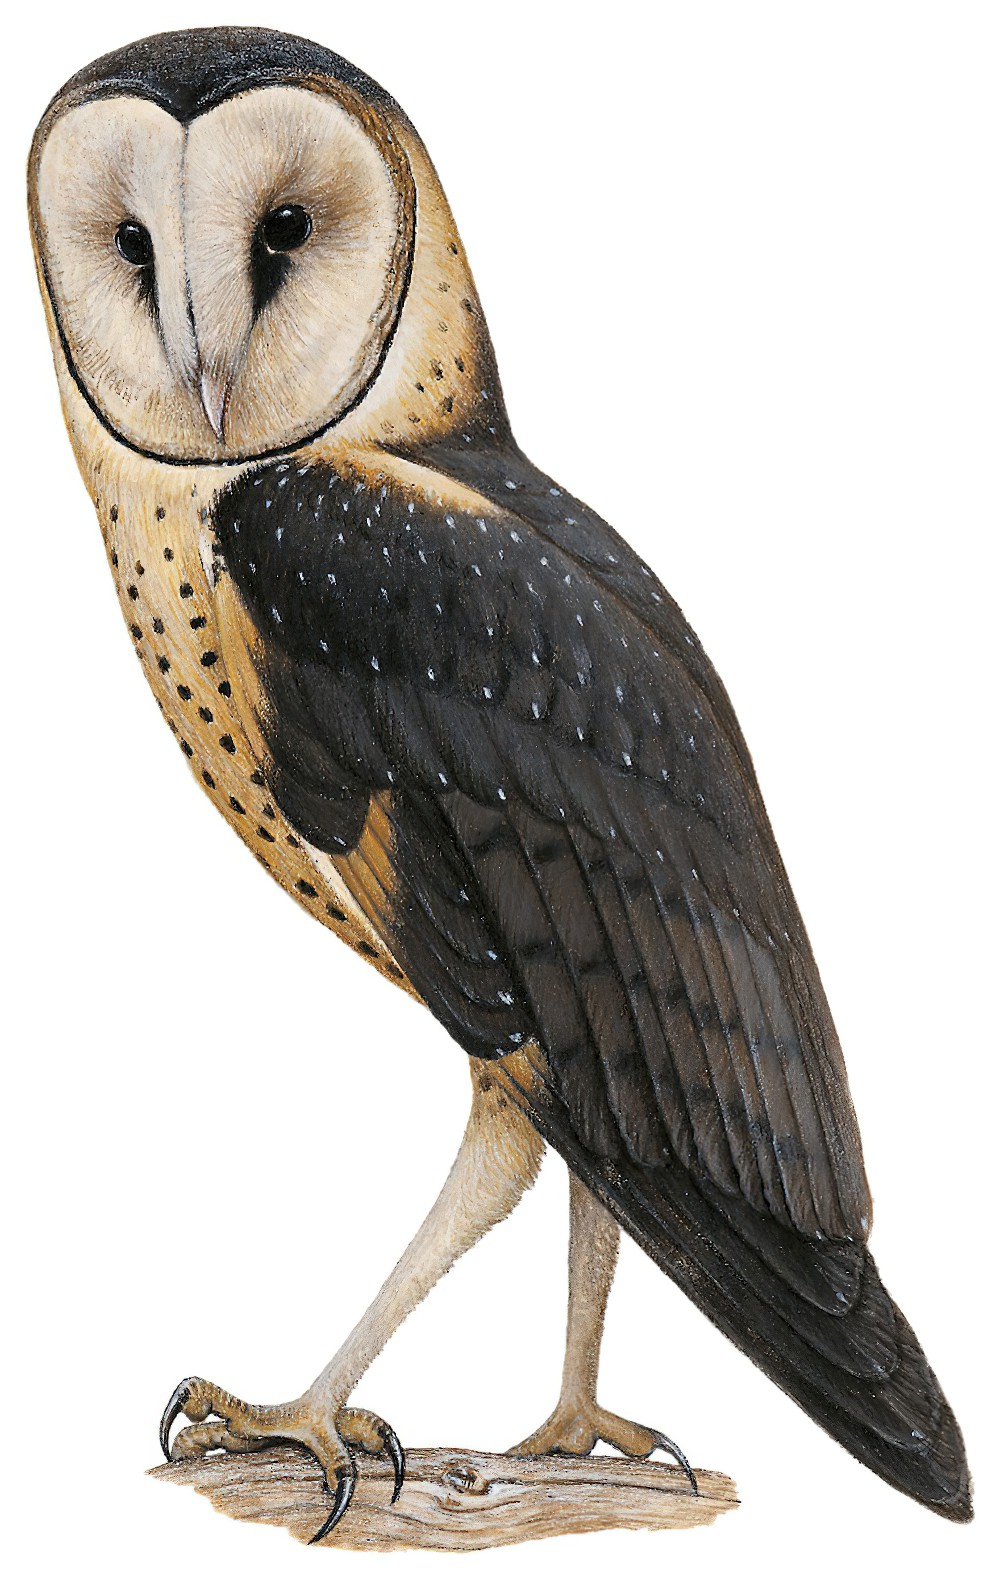 African Grass-Owl / Tyto capensis